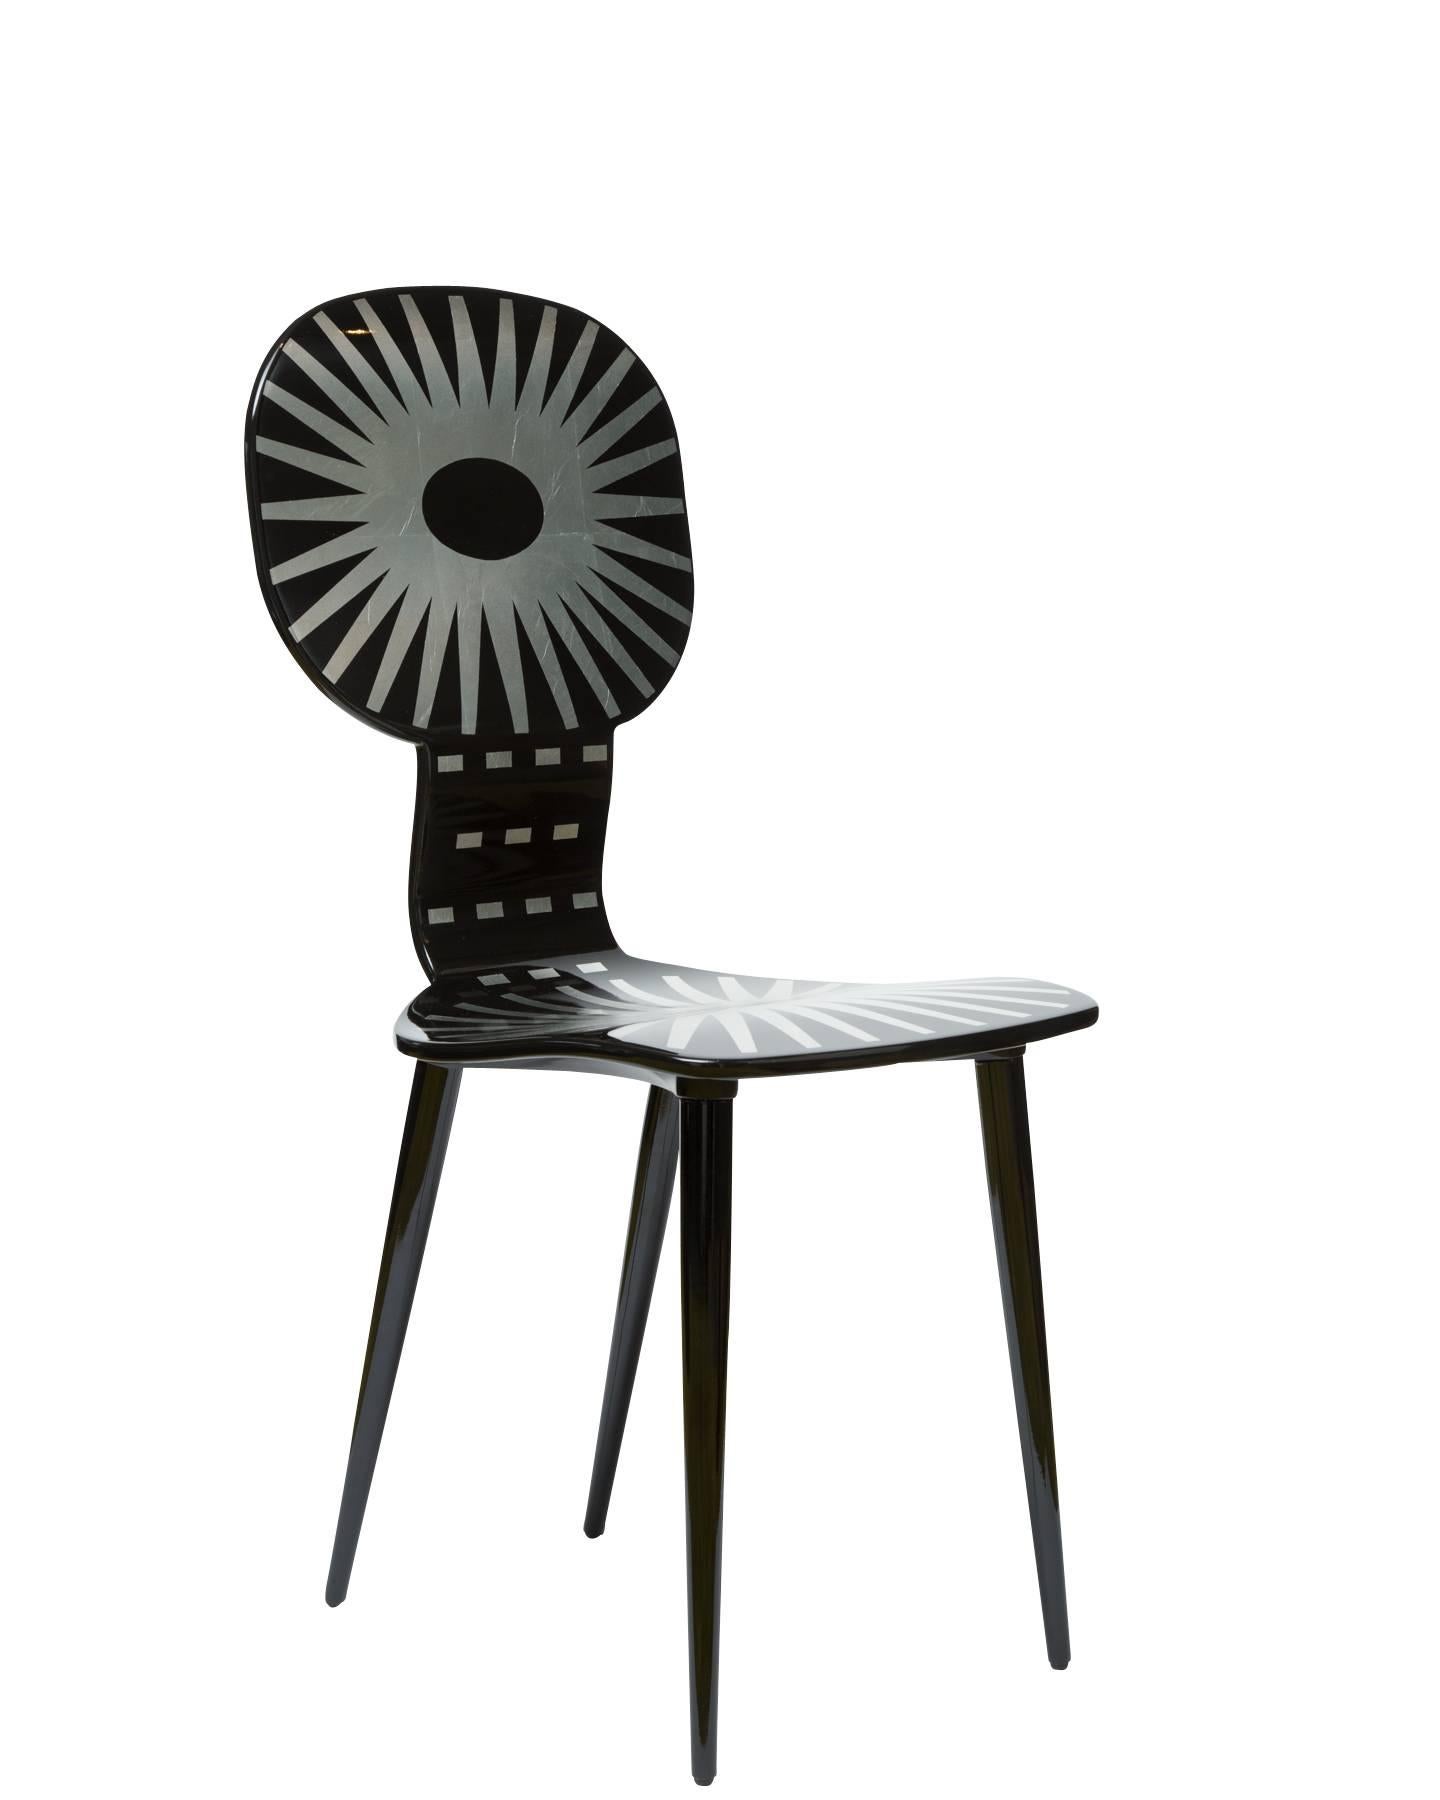 This chair has a lithographically applied graphic which is hand-finished and covered with a smooth lacquer.

4 of 12 made in 2016.

The Italian artist and illustrator Piero Fornasetti was one of the wittiest and most imaginative design talents of